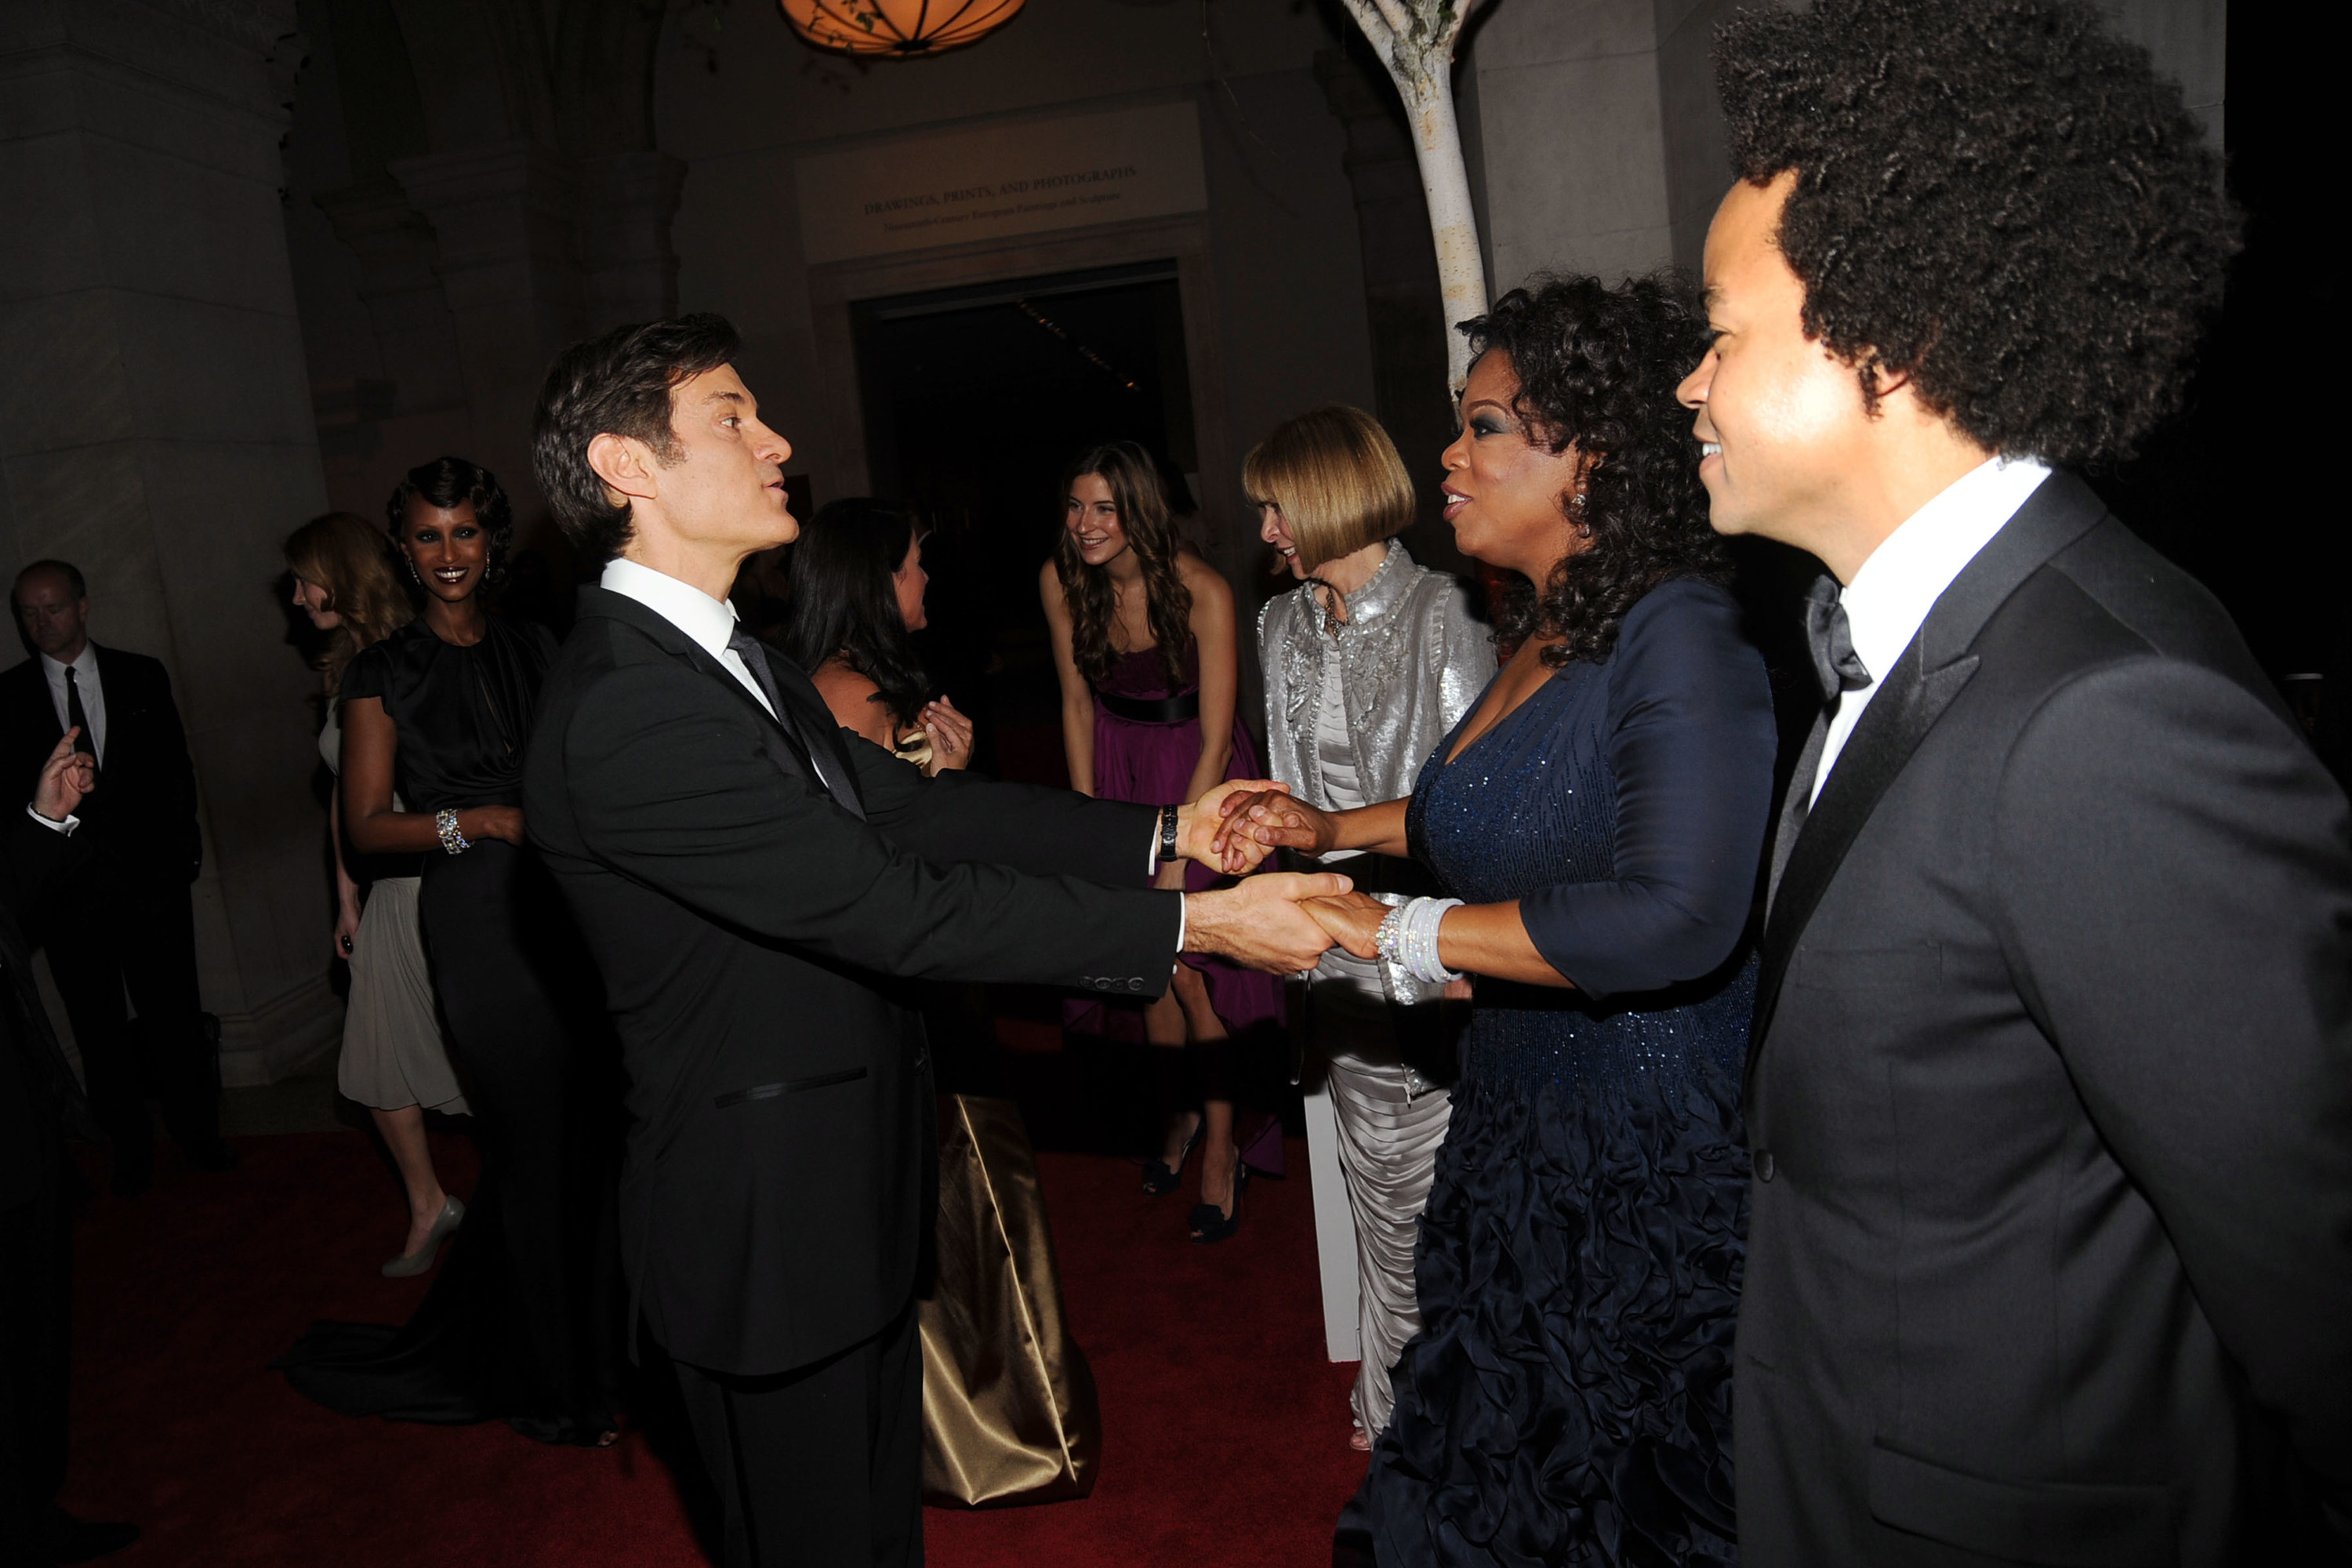 Oz and Oprah at a black-tie event, holding each others&#x27; hands at a distance and surrounded by others dressed formally at an indoor venue